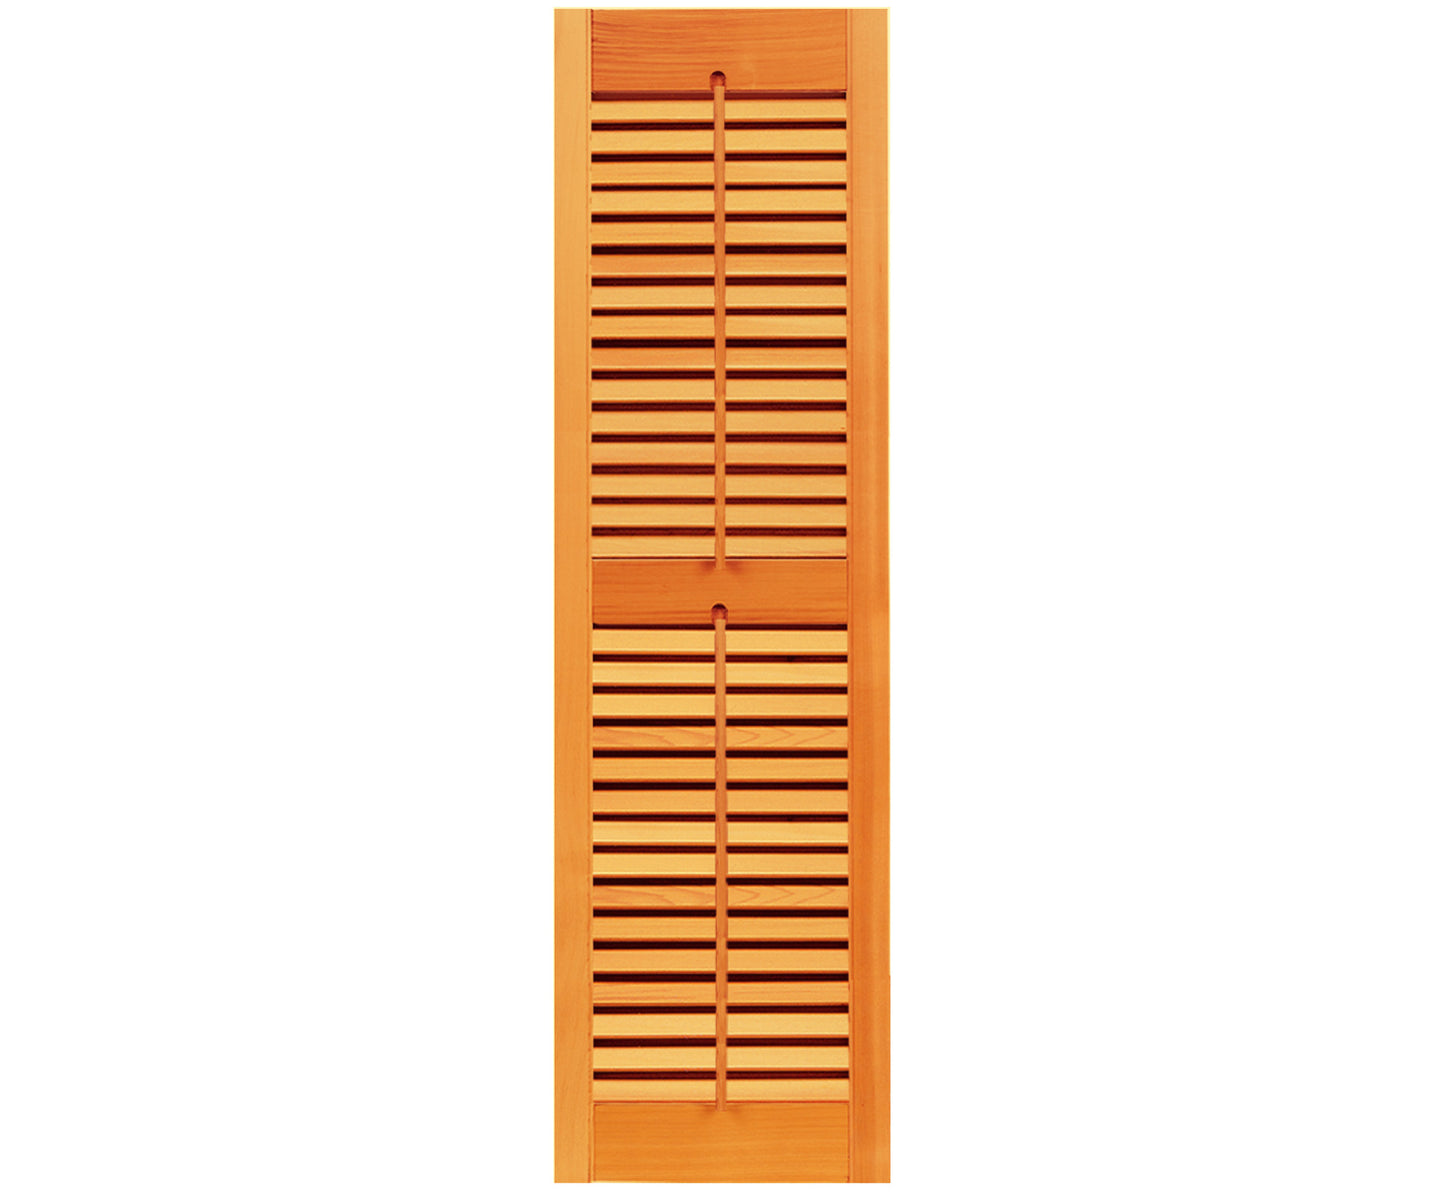 24" Western Red Cedar Fixed Louver Shutters - Pair Stain Grade